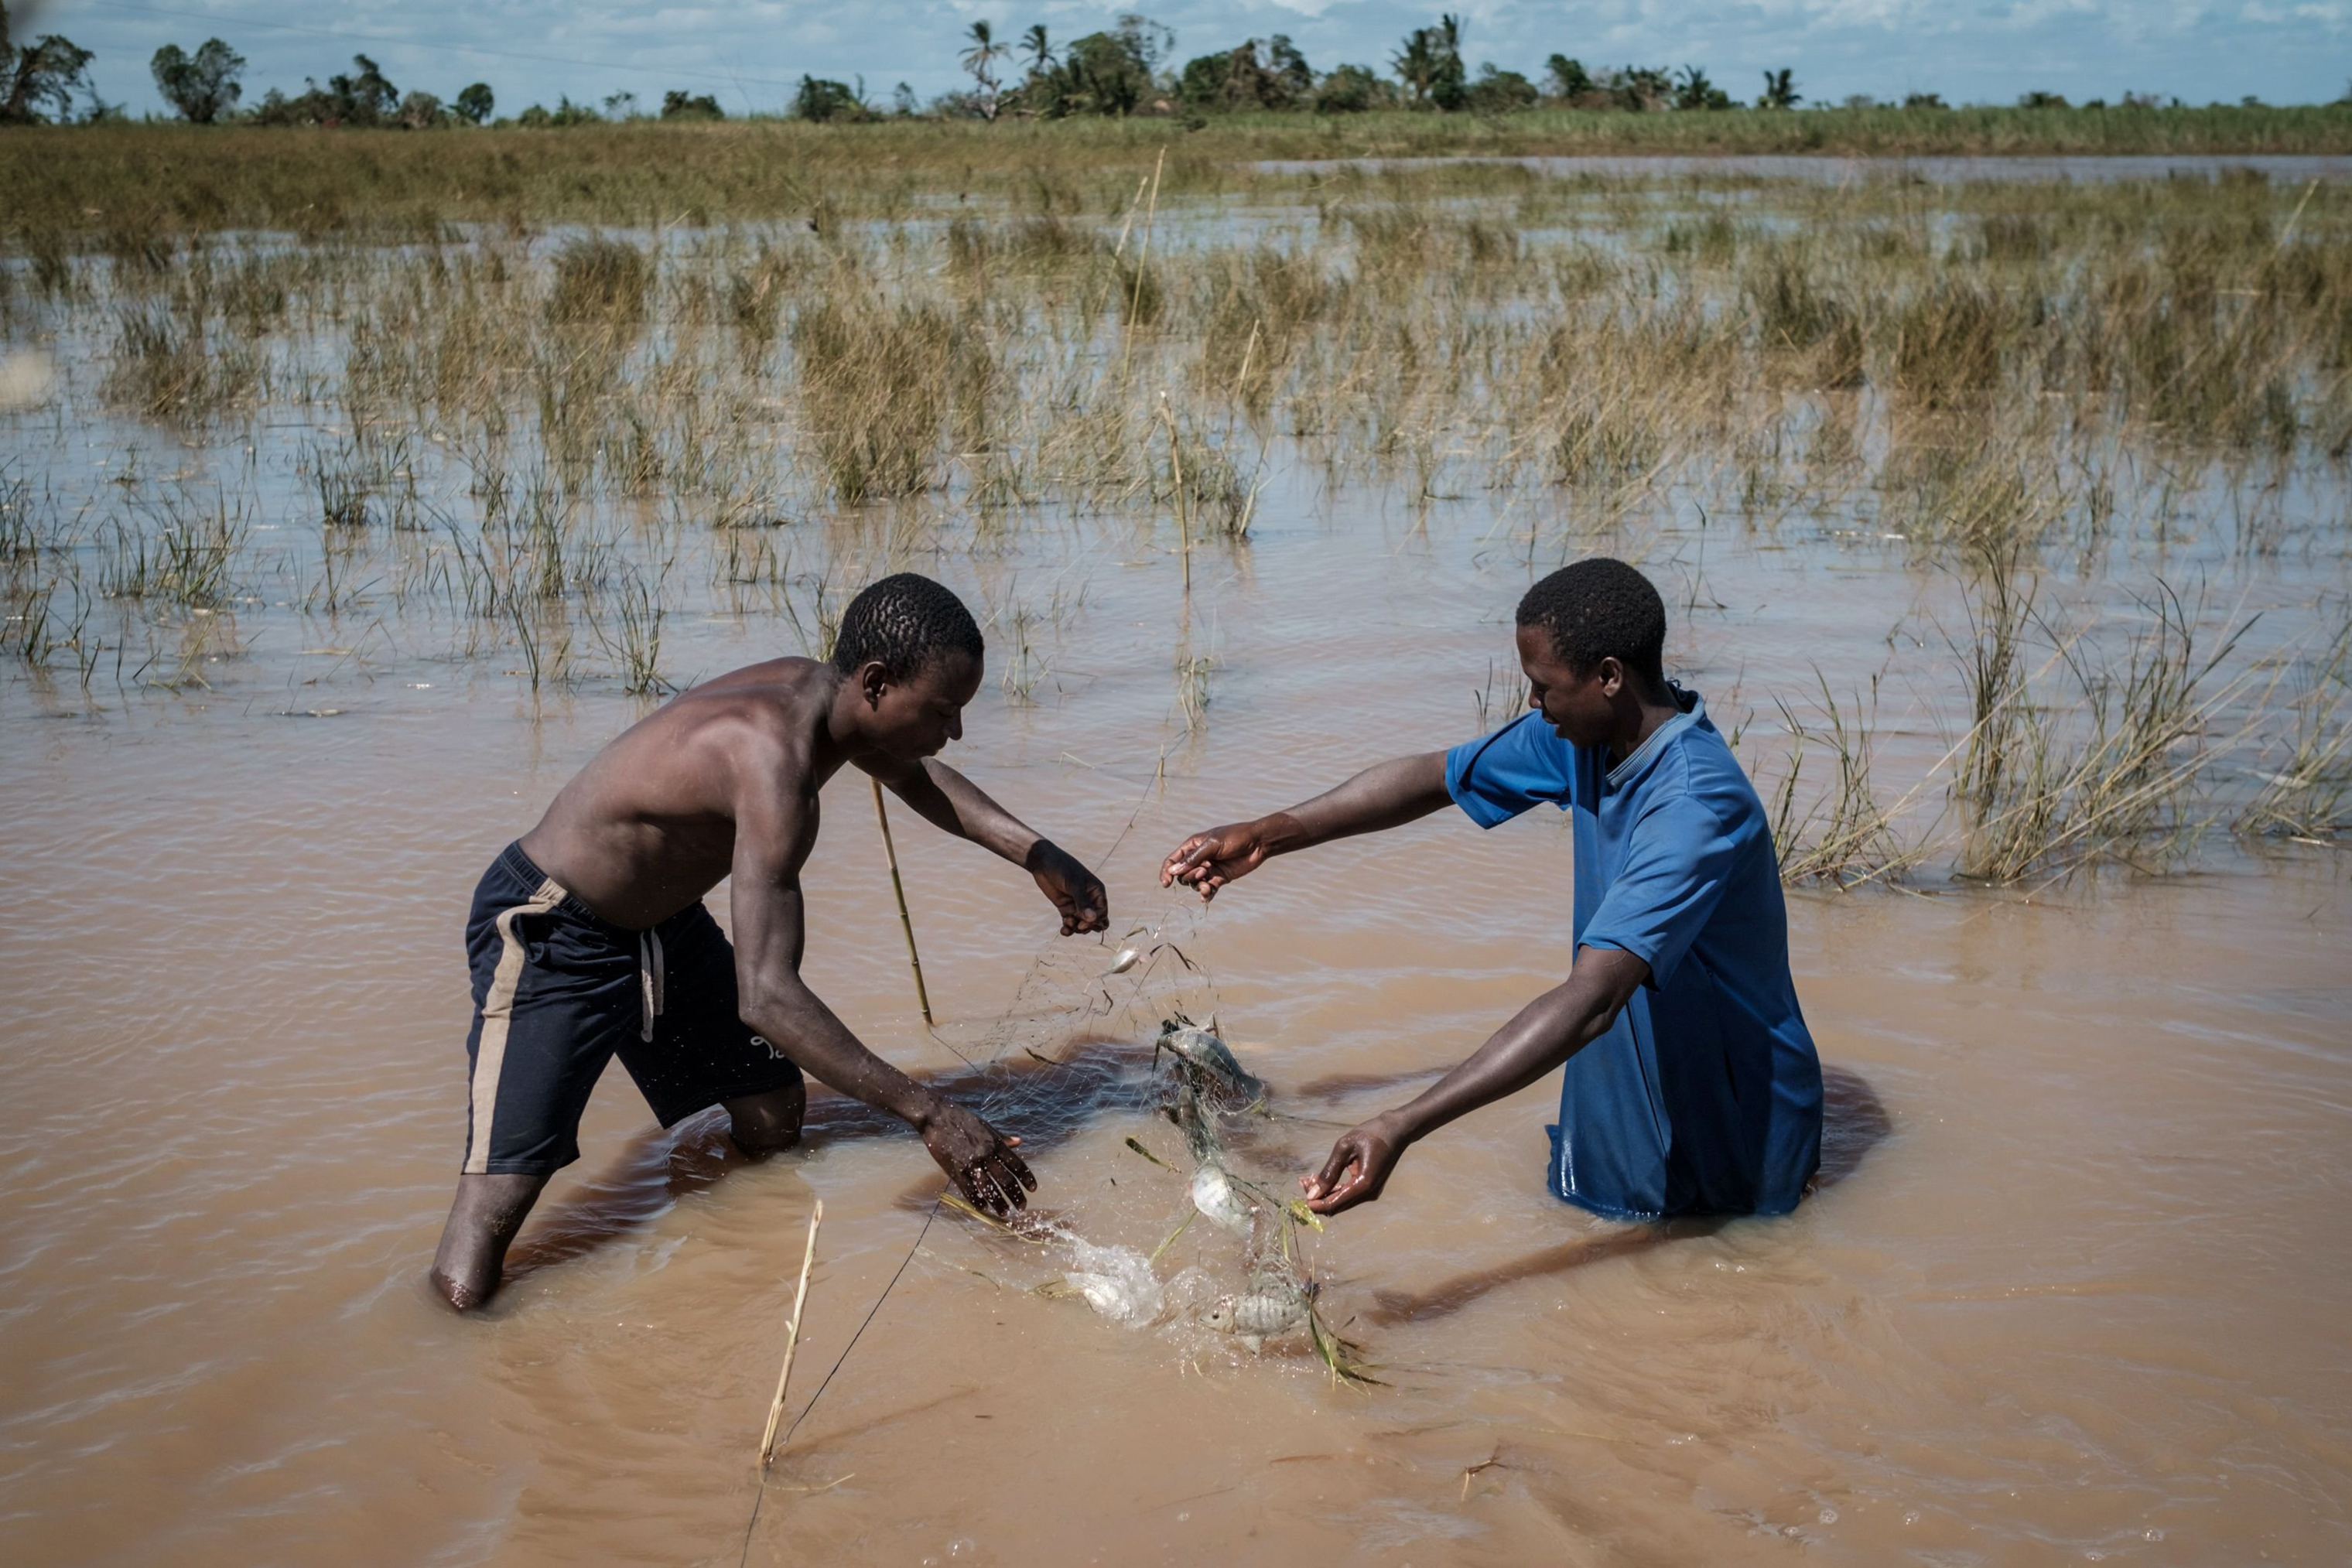 Fishermen catch fish in a flooded area hit by the Cyclone Idai in Tica, Mozambique, on March 24, 2019. (Yasuyoshi Chiba—AFP/Getty Images)